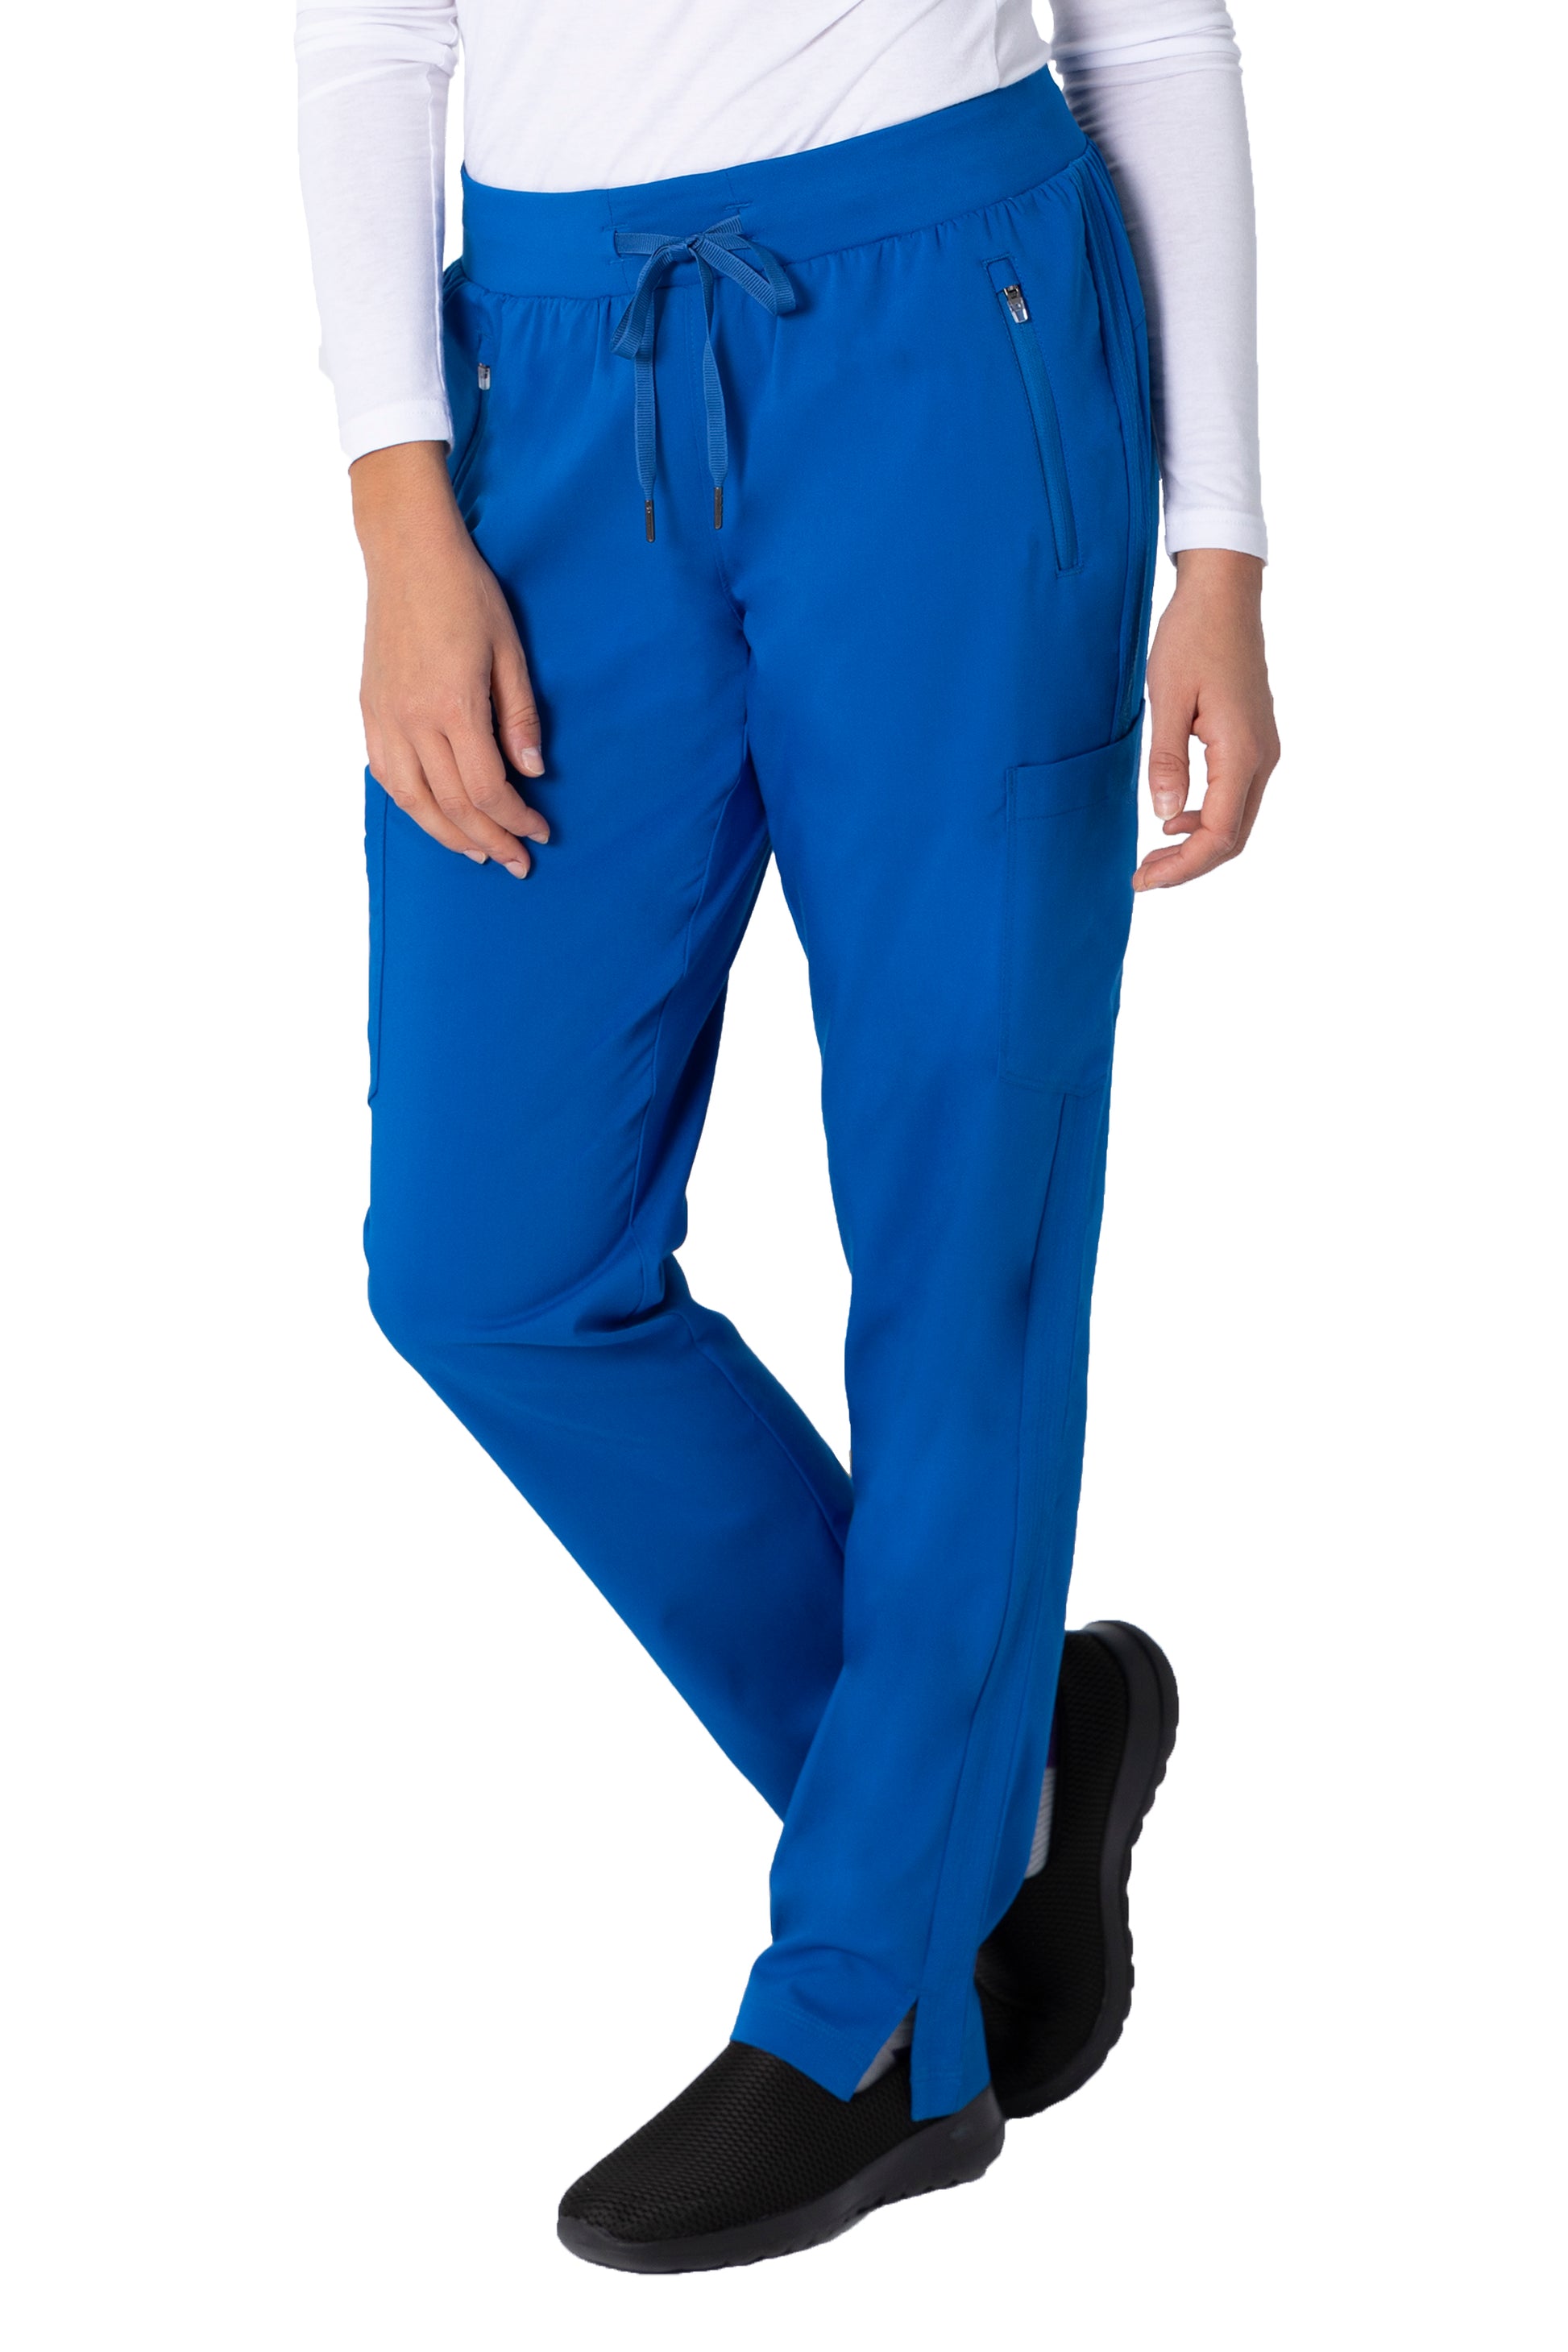 Healing Hands Purple Label Toni Yoga Petite Scrub Pant in Royal at Parker's Clothing and Shoes.